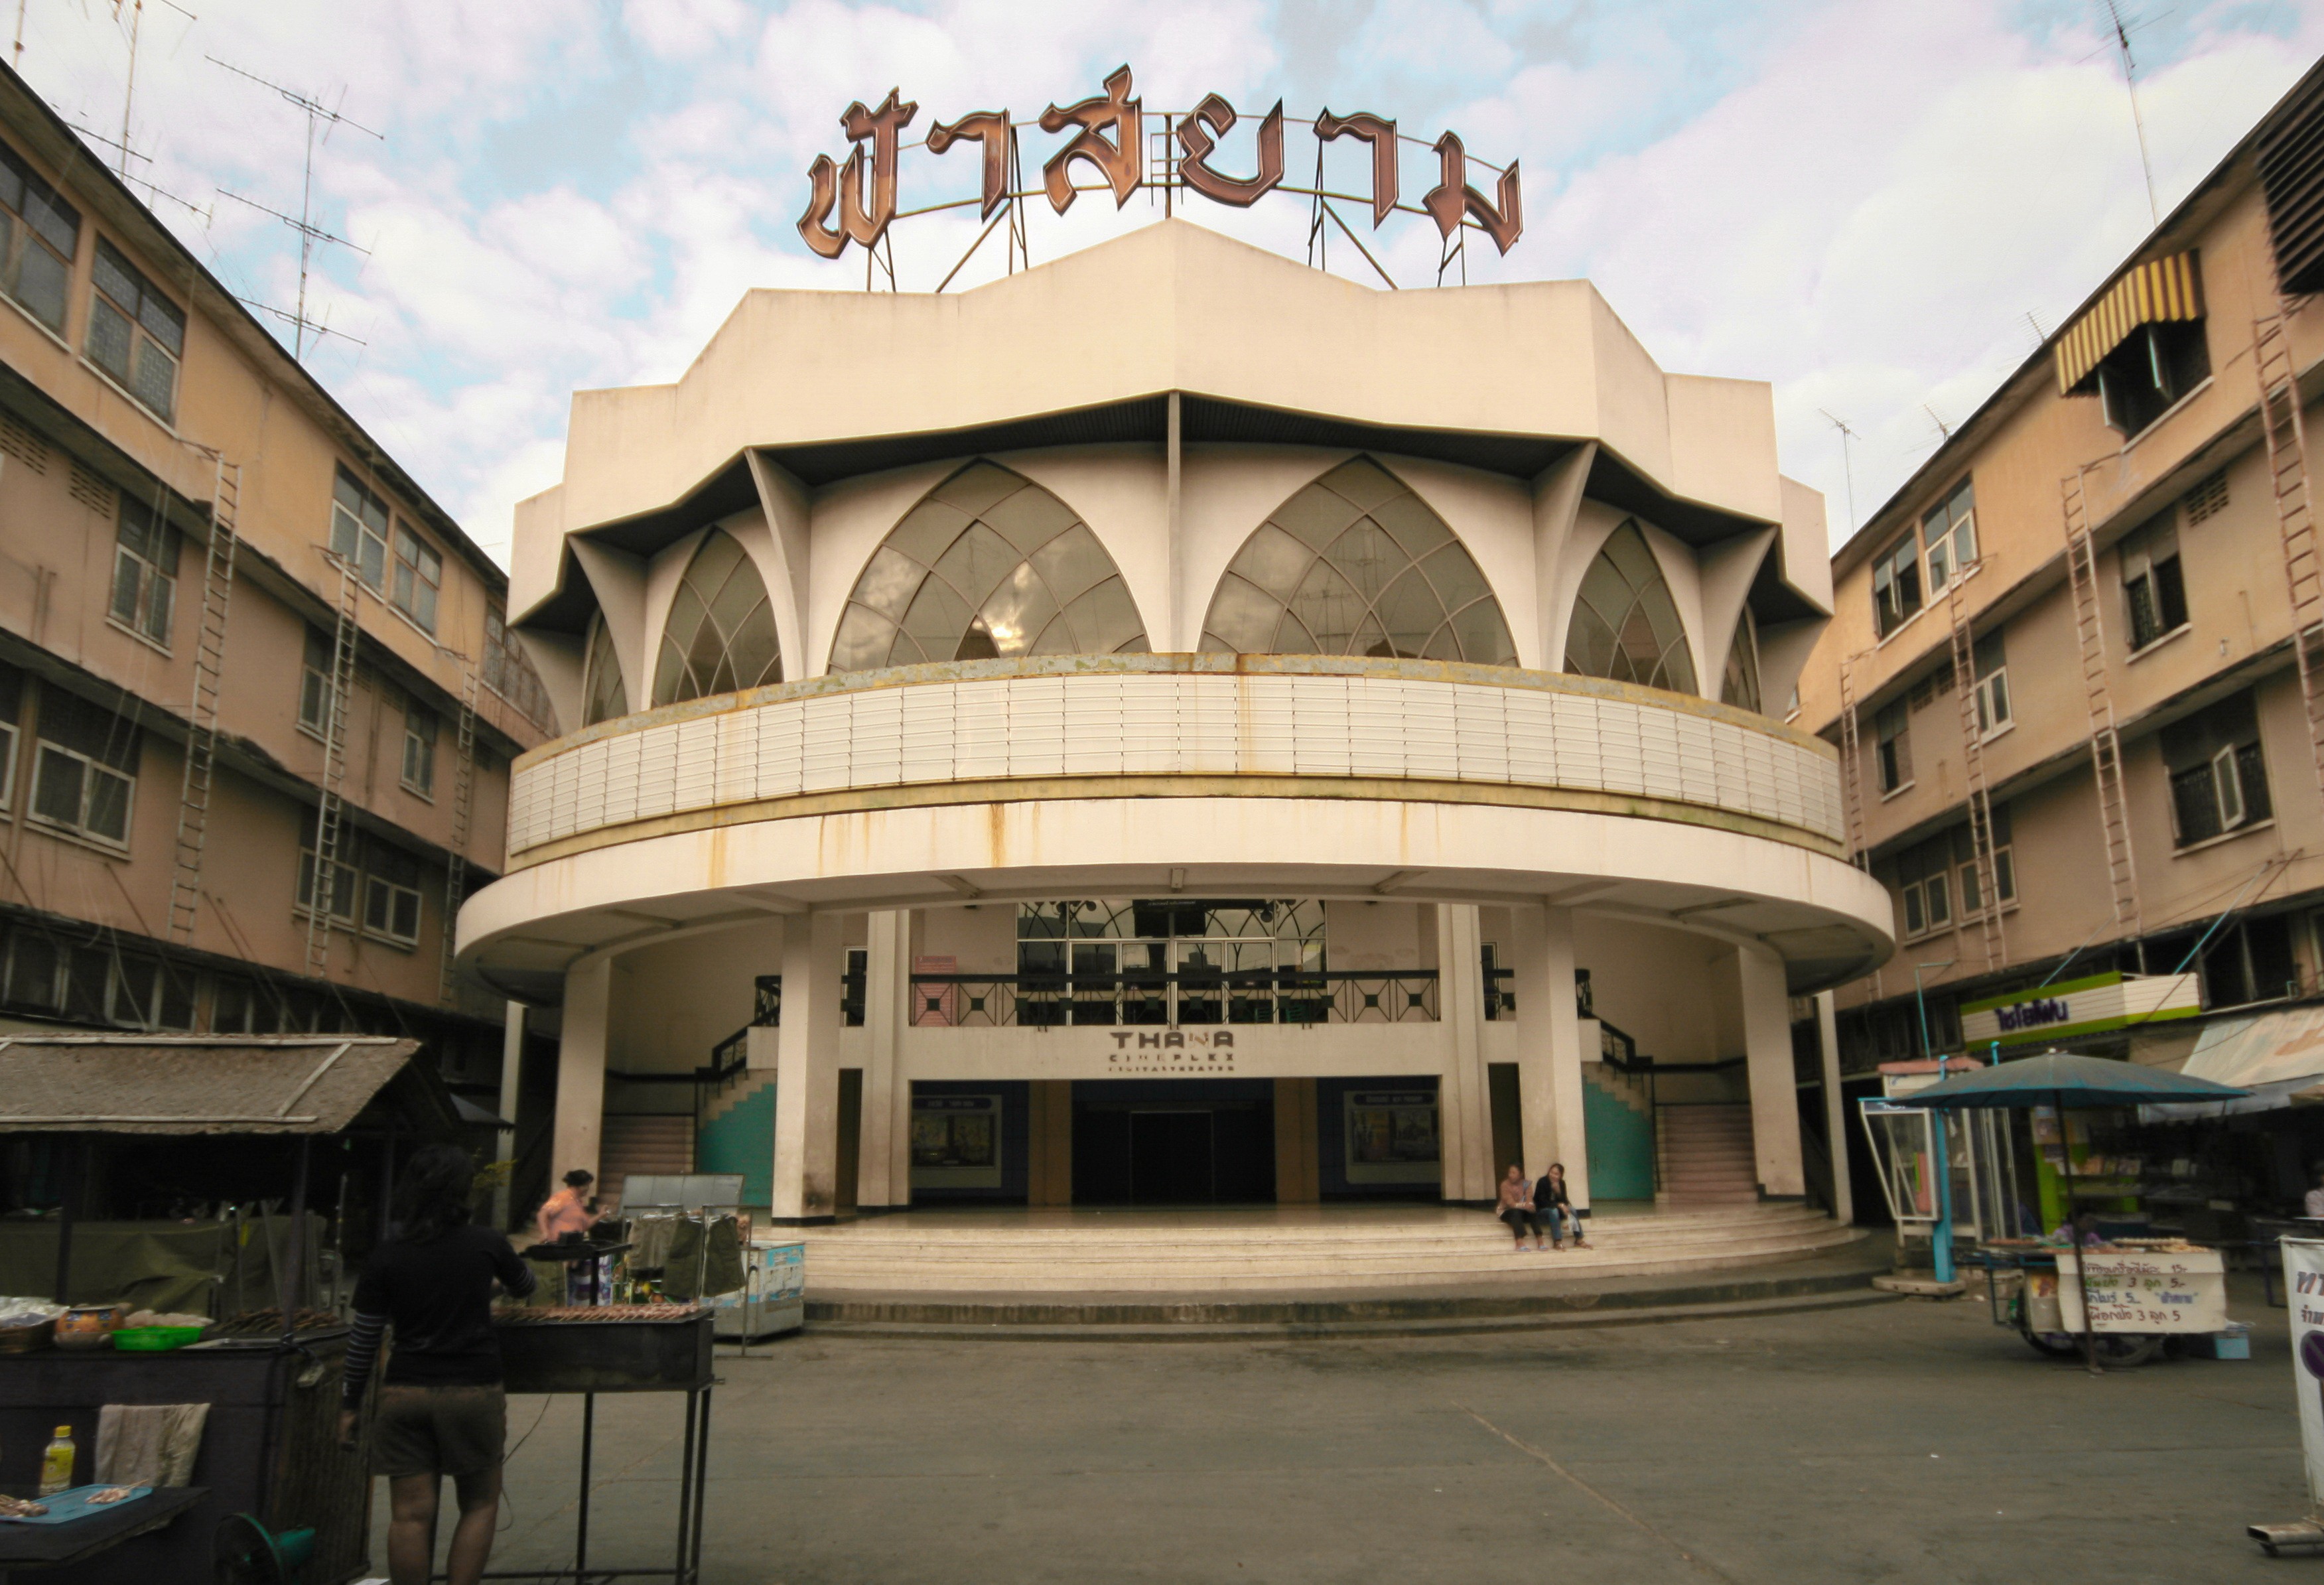 The exterior of Fa Siam cinema in Suphan Buri, Thailand, one of the many celebrated in a book by Philip Jablon, Thailand’s Movie Theatres. Photo: Philip Jablon